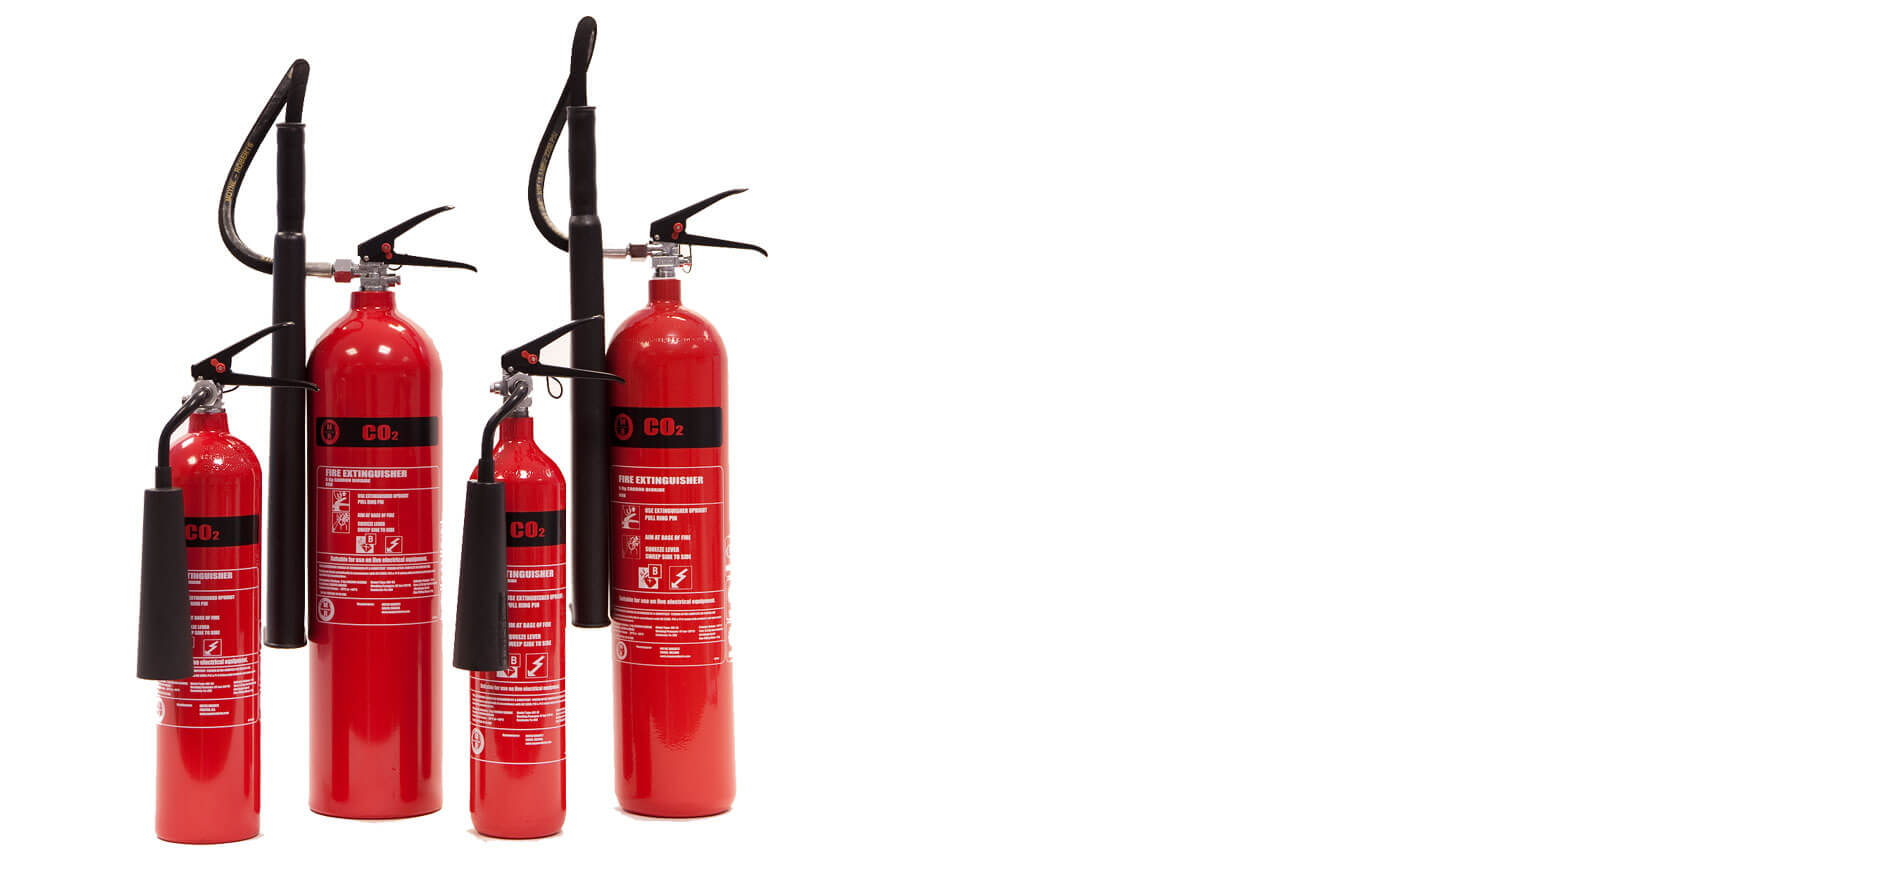 How Do CO2 Fire Extinguishers Work?